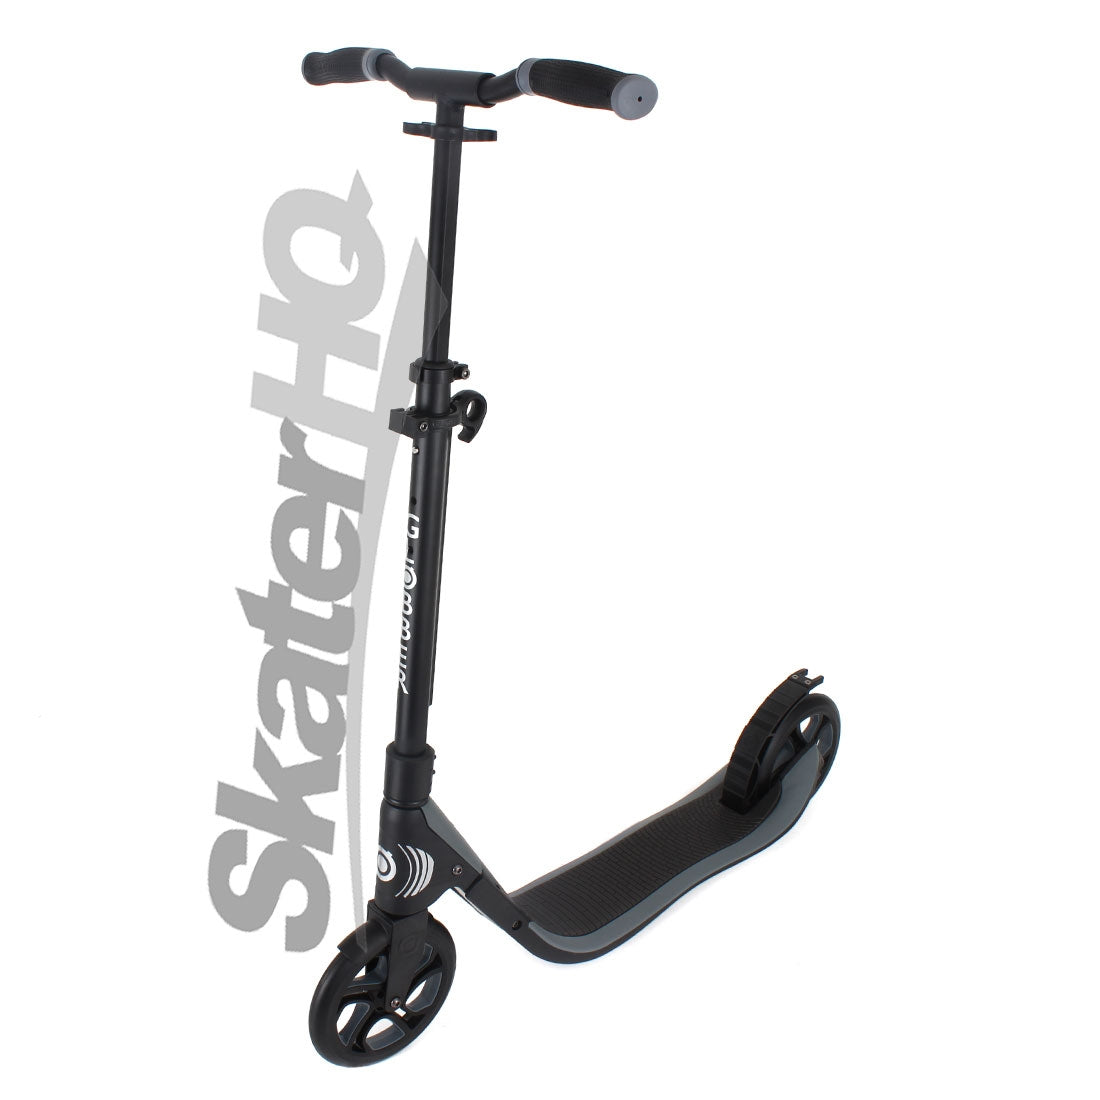 Globber ONE NL 205 Scooter - Black Scooter Completes Rec